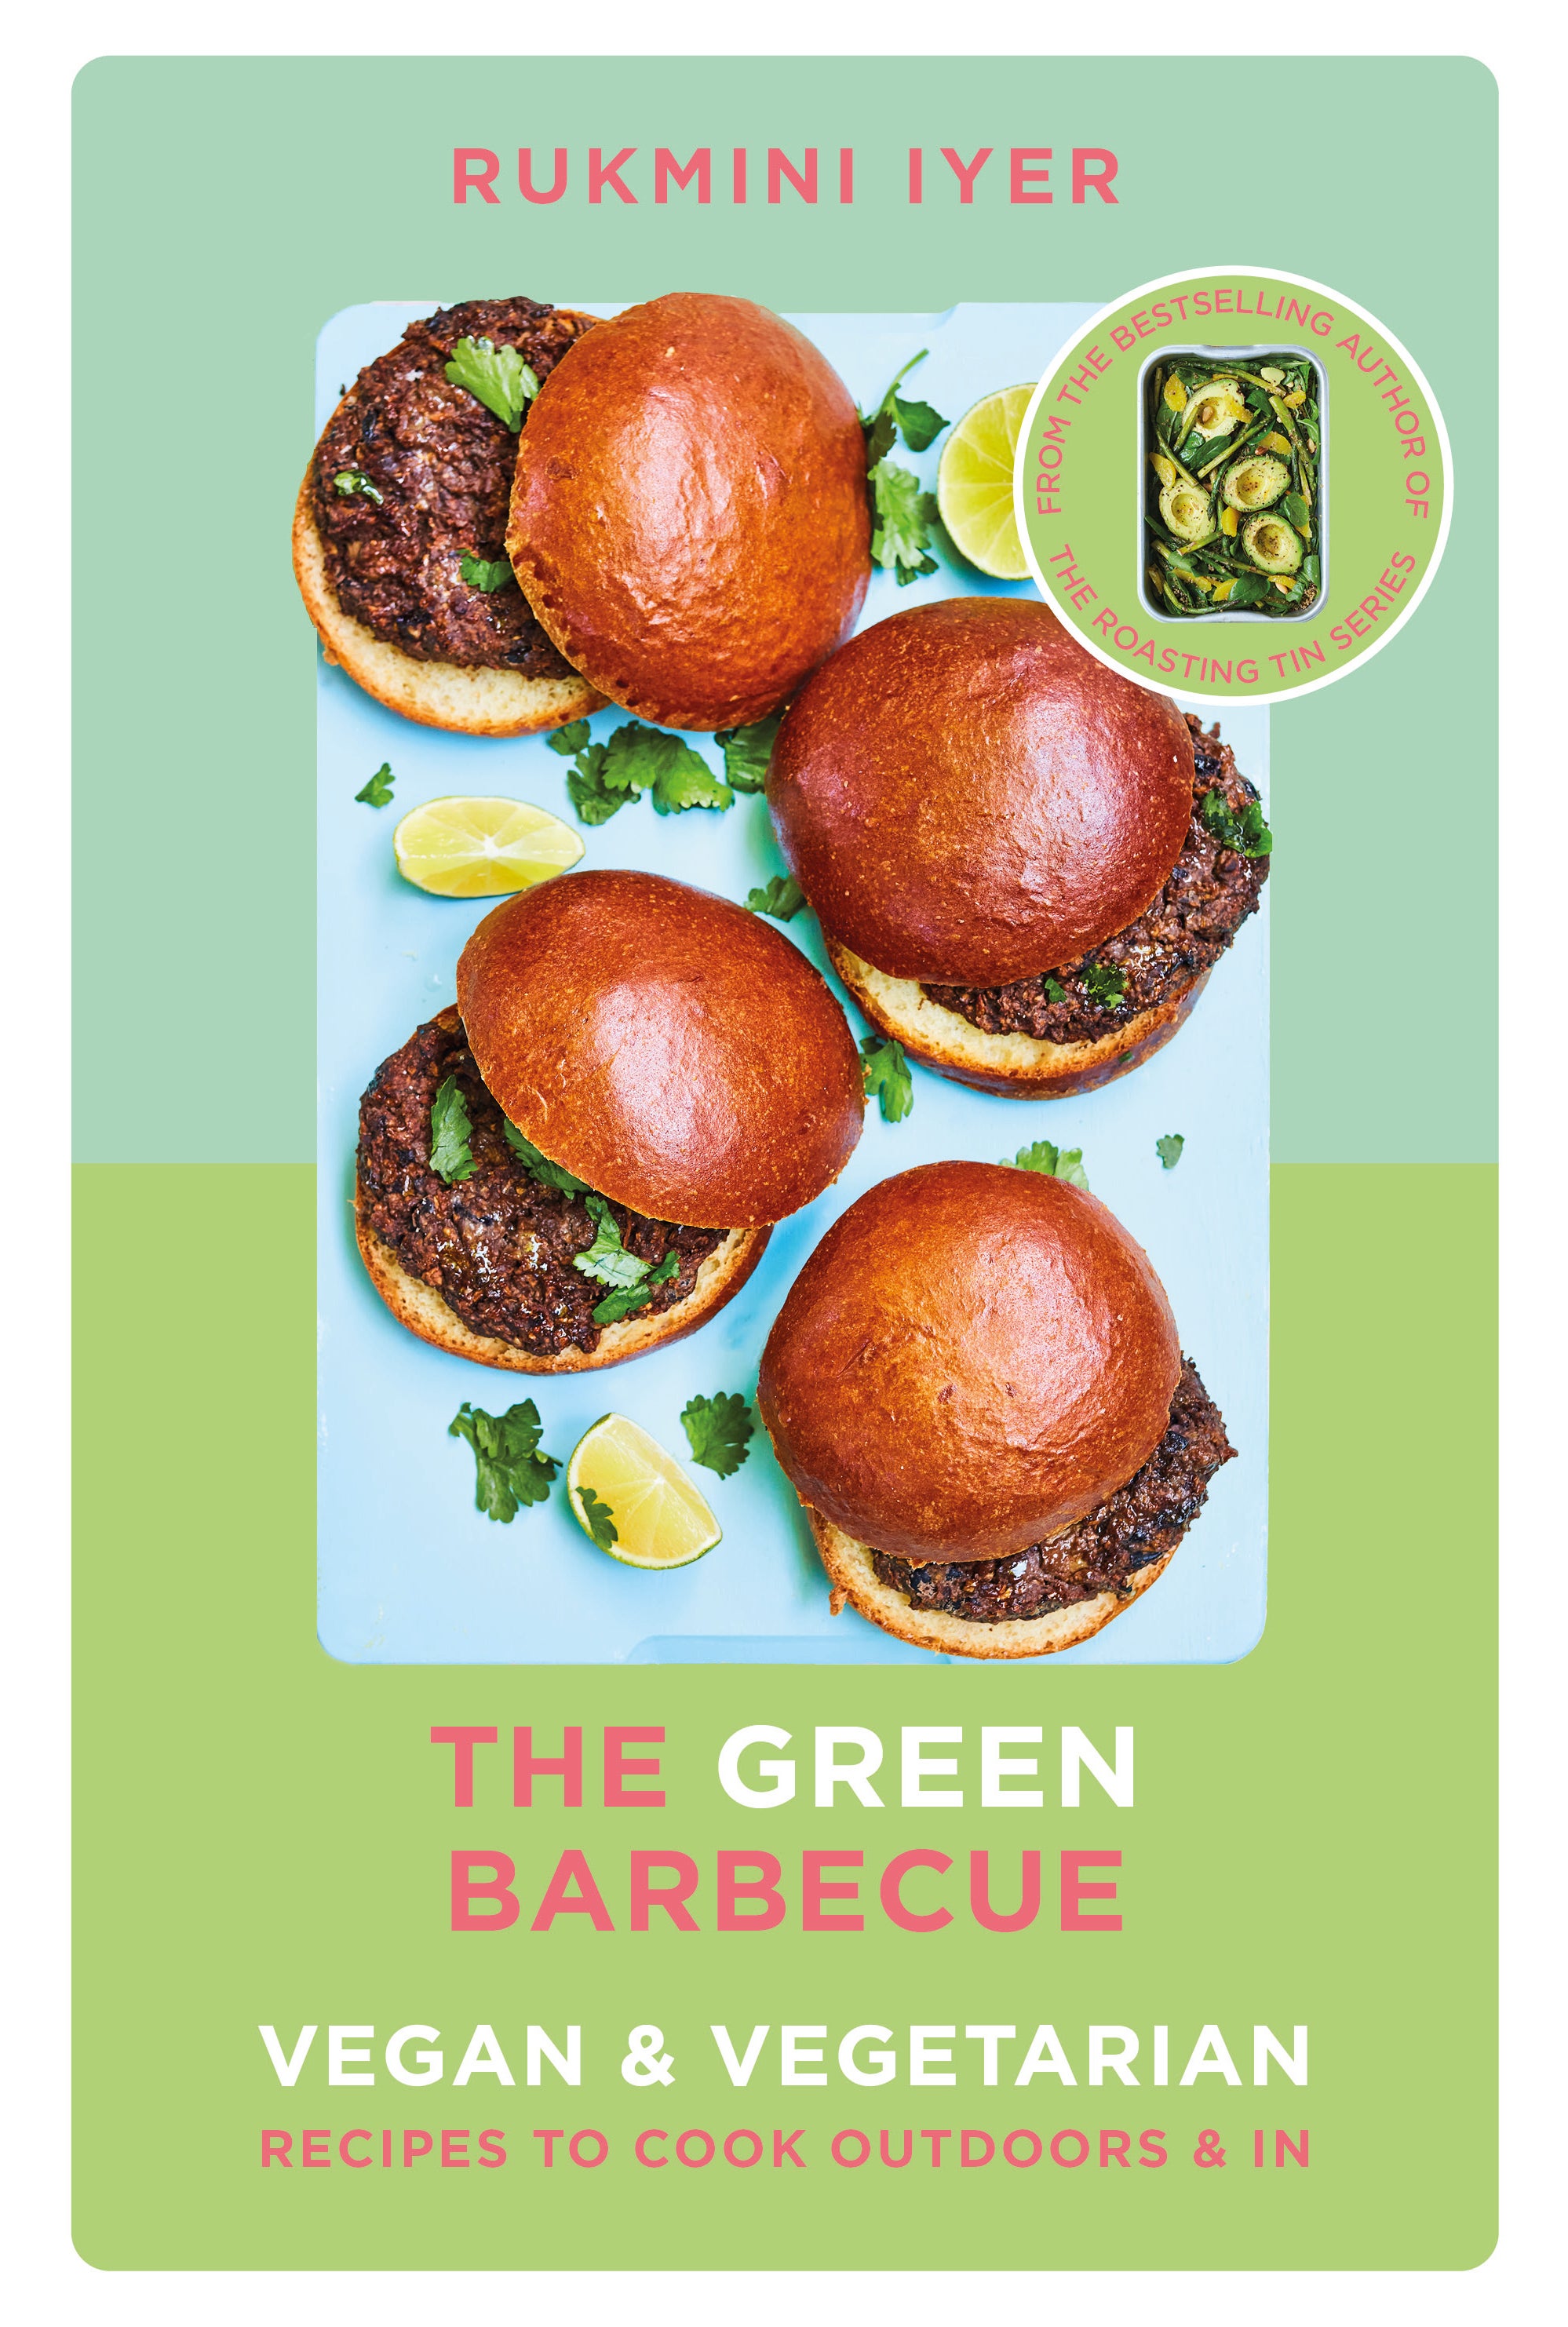 ‘The Green Barbecue’ is Iyer’s latest book